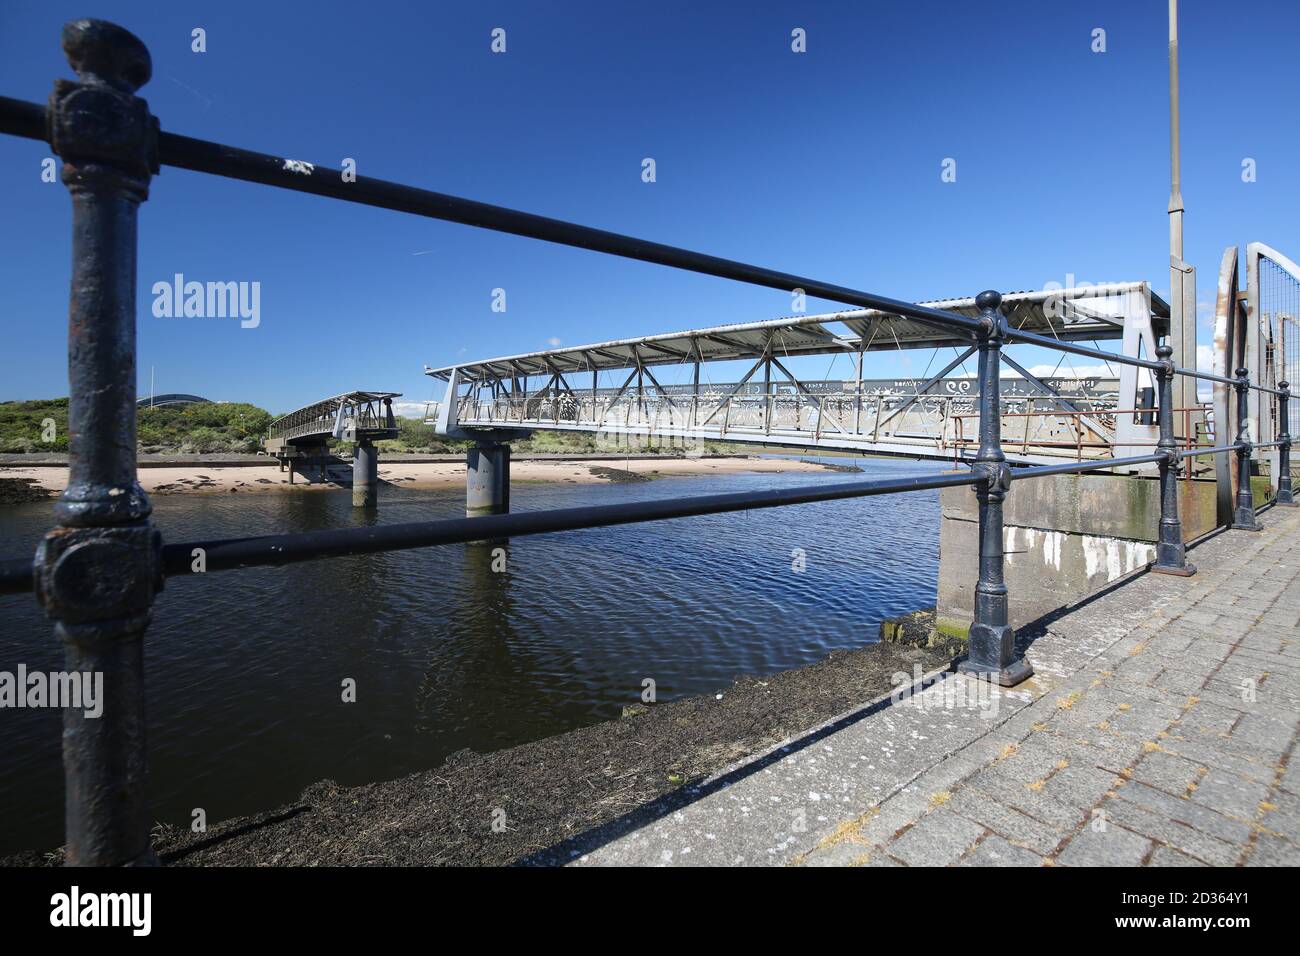 The Bridge Of Scottish Invention Is A Retractable Footbridge Across The River Irvine Which Gave